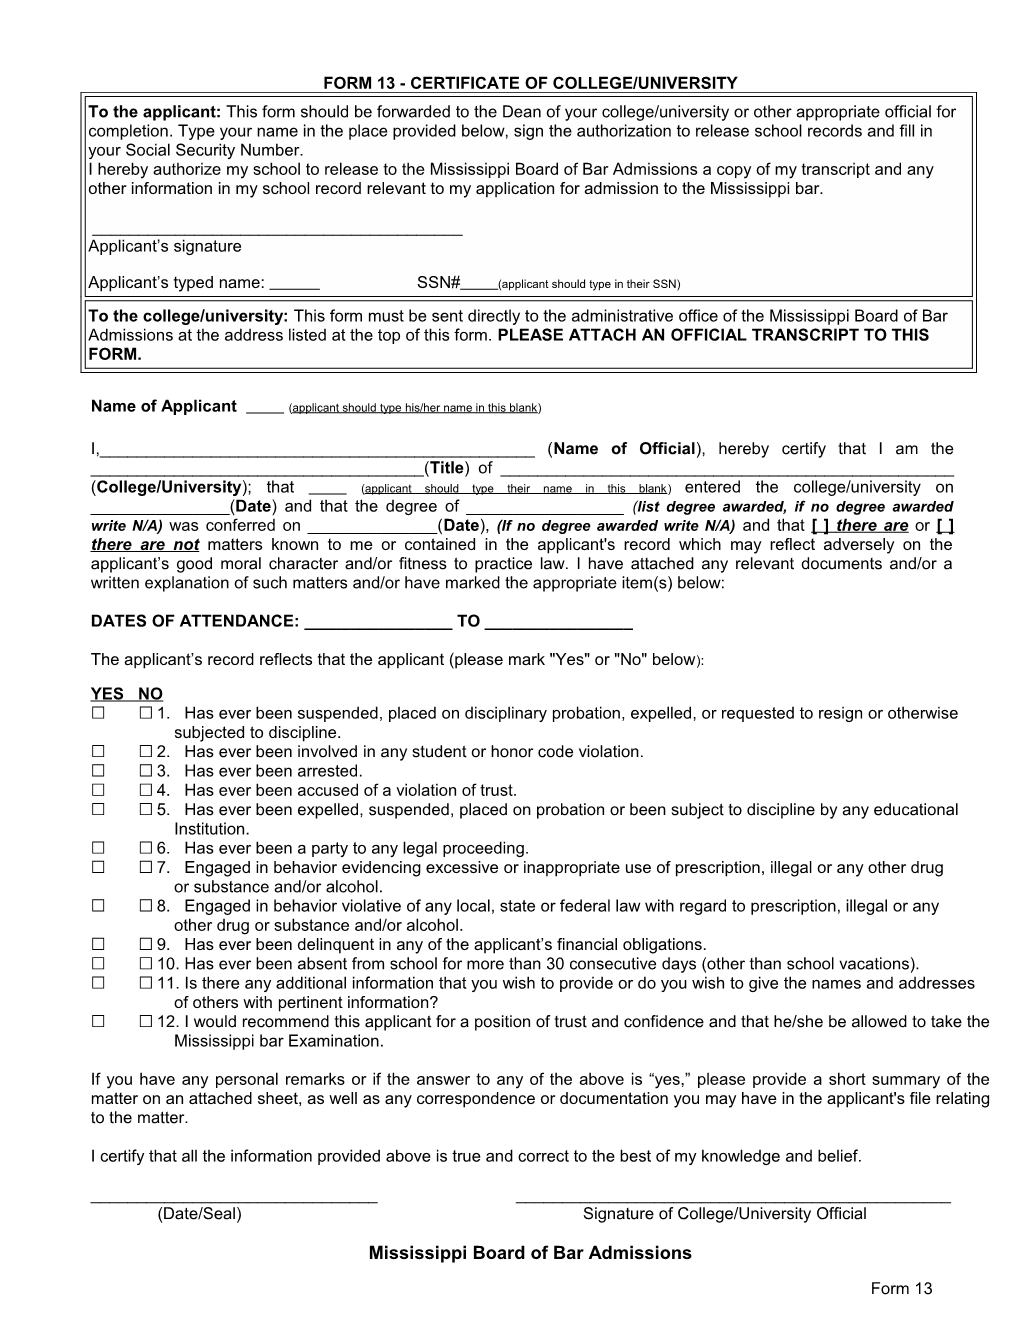 Form 13 - Certificate of College/University